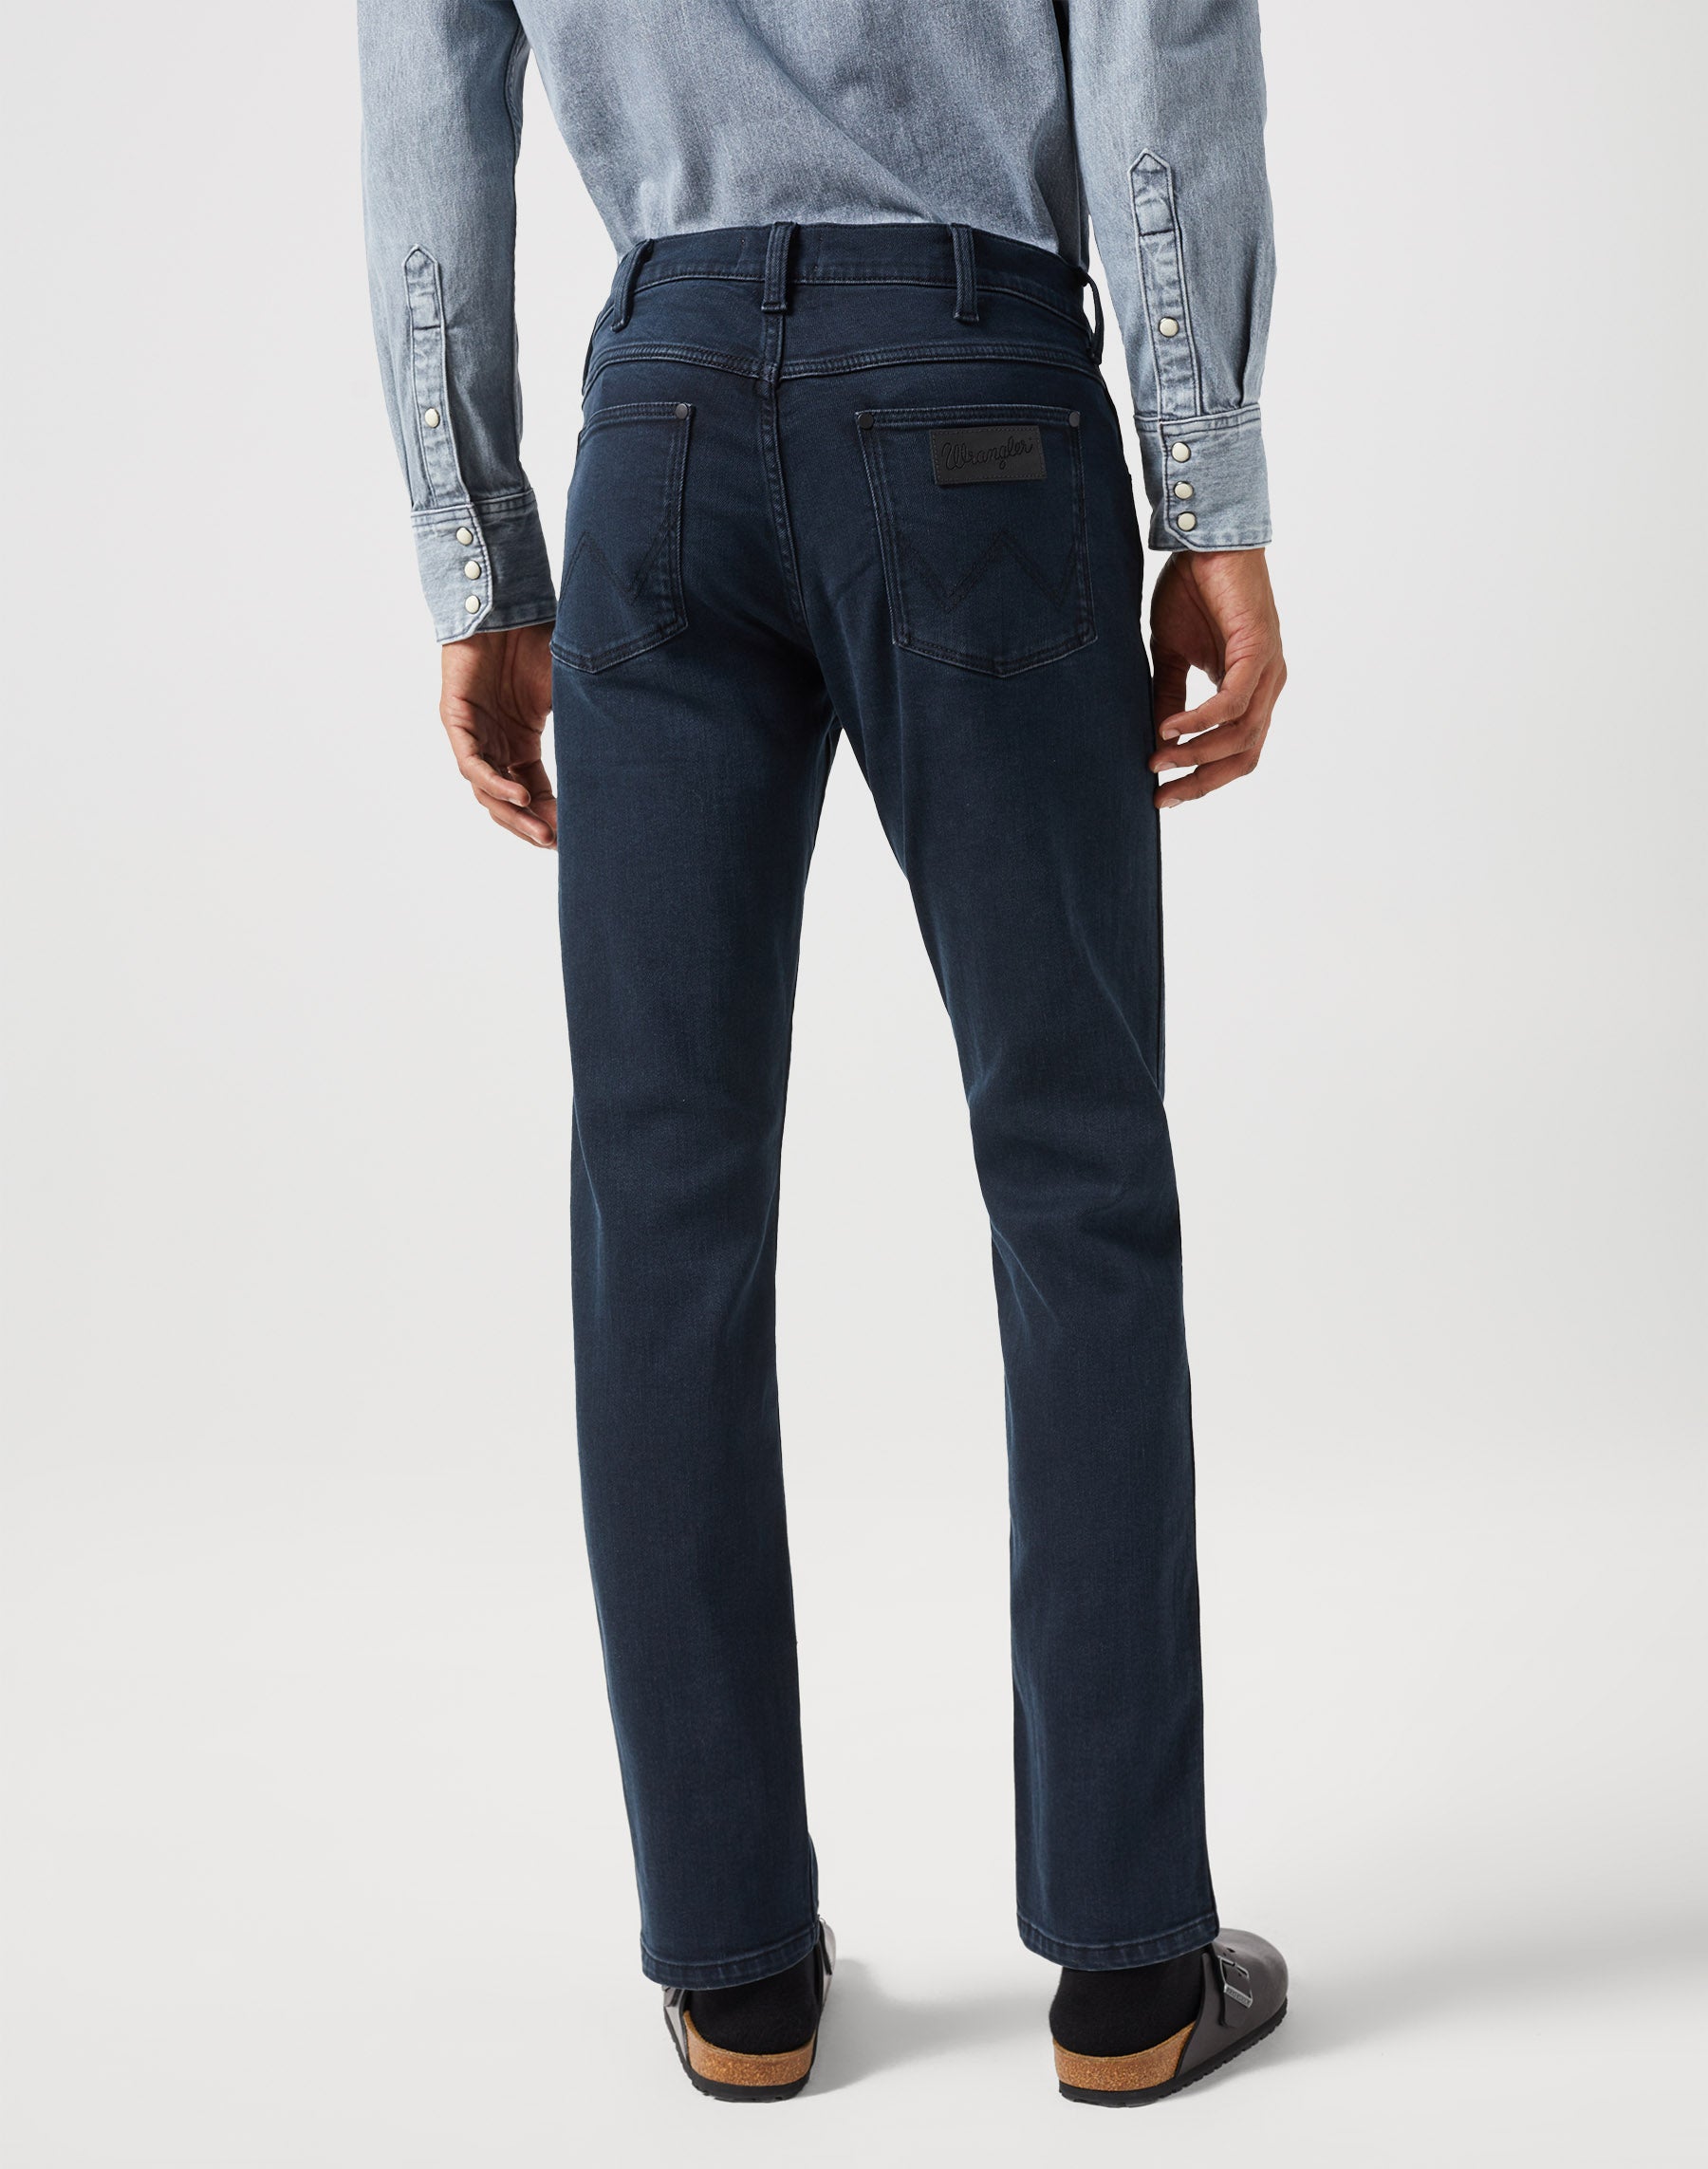 Greensboro Low Stretch in Cloudy Skies Jeans Wrangler   